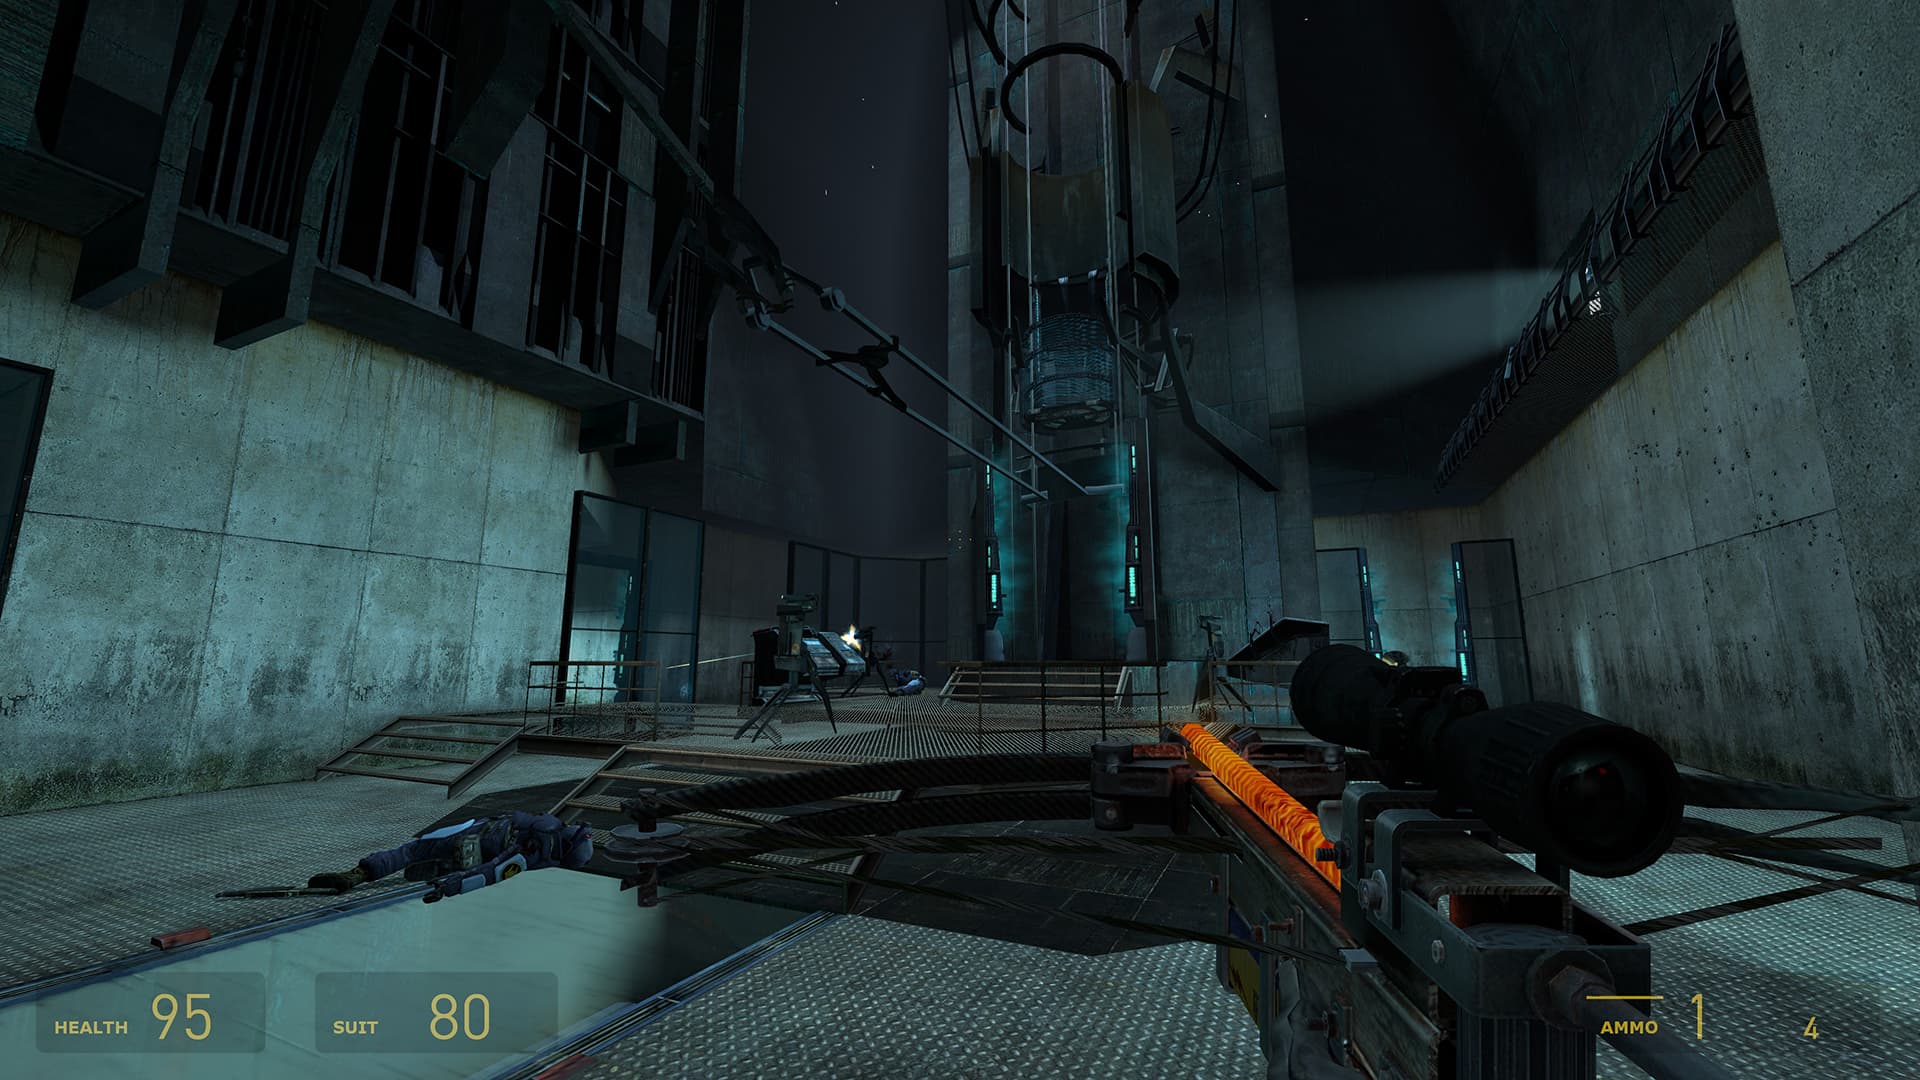 A screenshot from Half-Life 2. At Nova Prospekt's Combine portal, two sentry guns stand guard and one fires as Gordon and Alyx stand nearby.